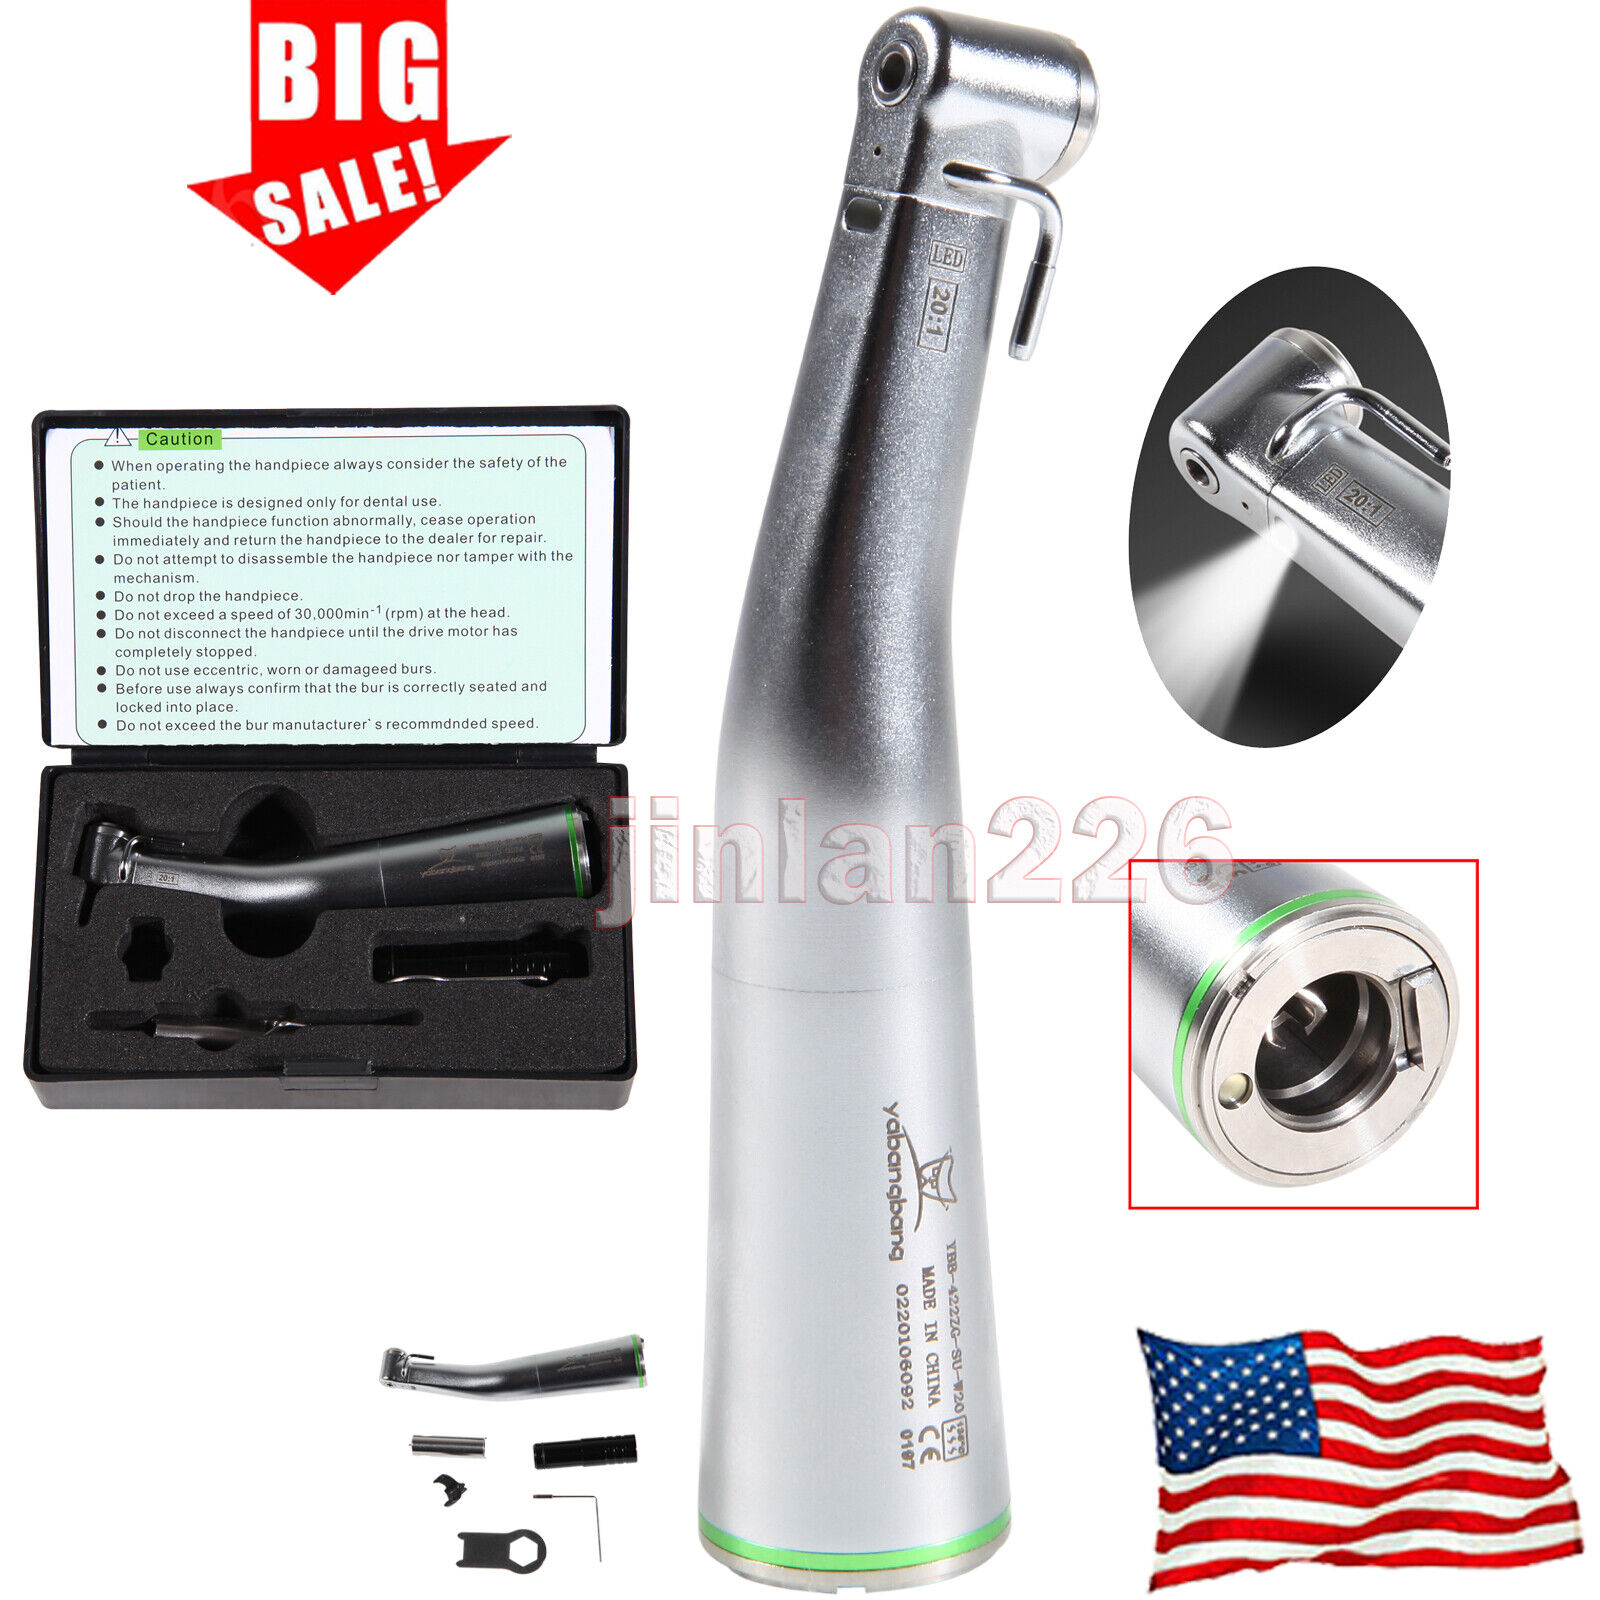 Dental 20:1 Implant LED Surgical Contra Angle Handpiece Low Speed NSK Style